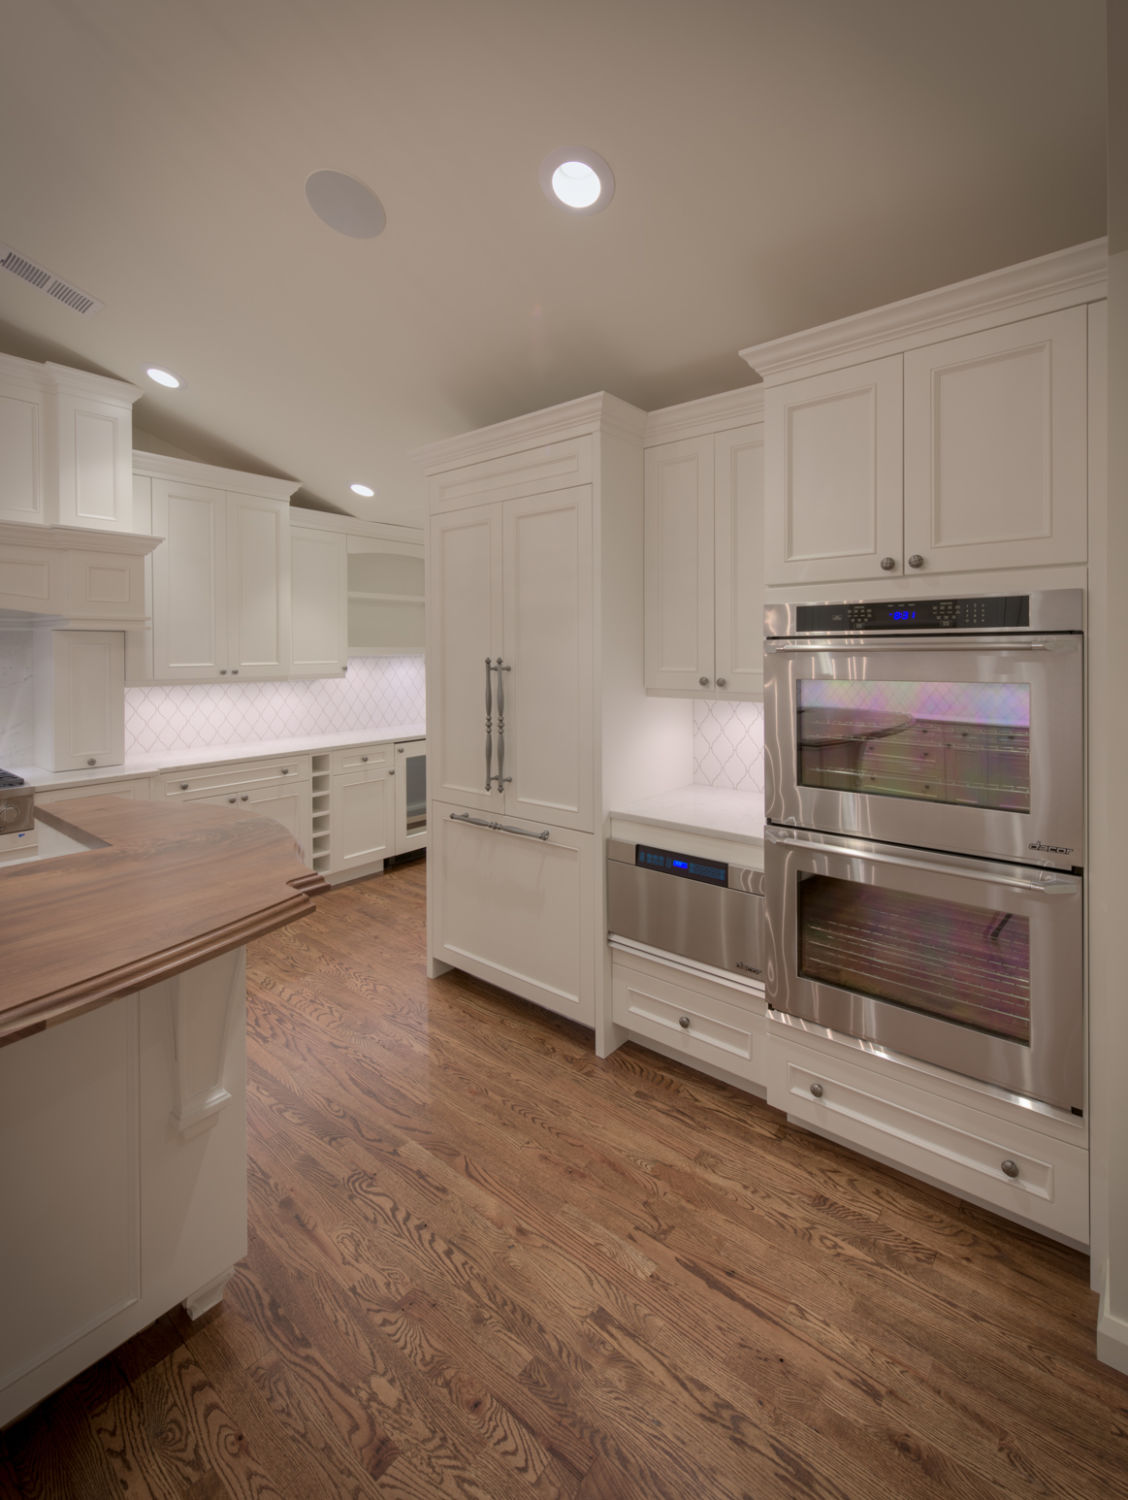 HighCraft-Builders-traditional-kitchen-remodel-with-paneled-fridge-double-oven-and-microwave-drawer